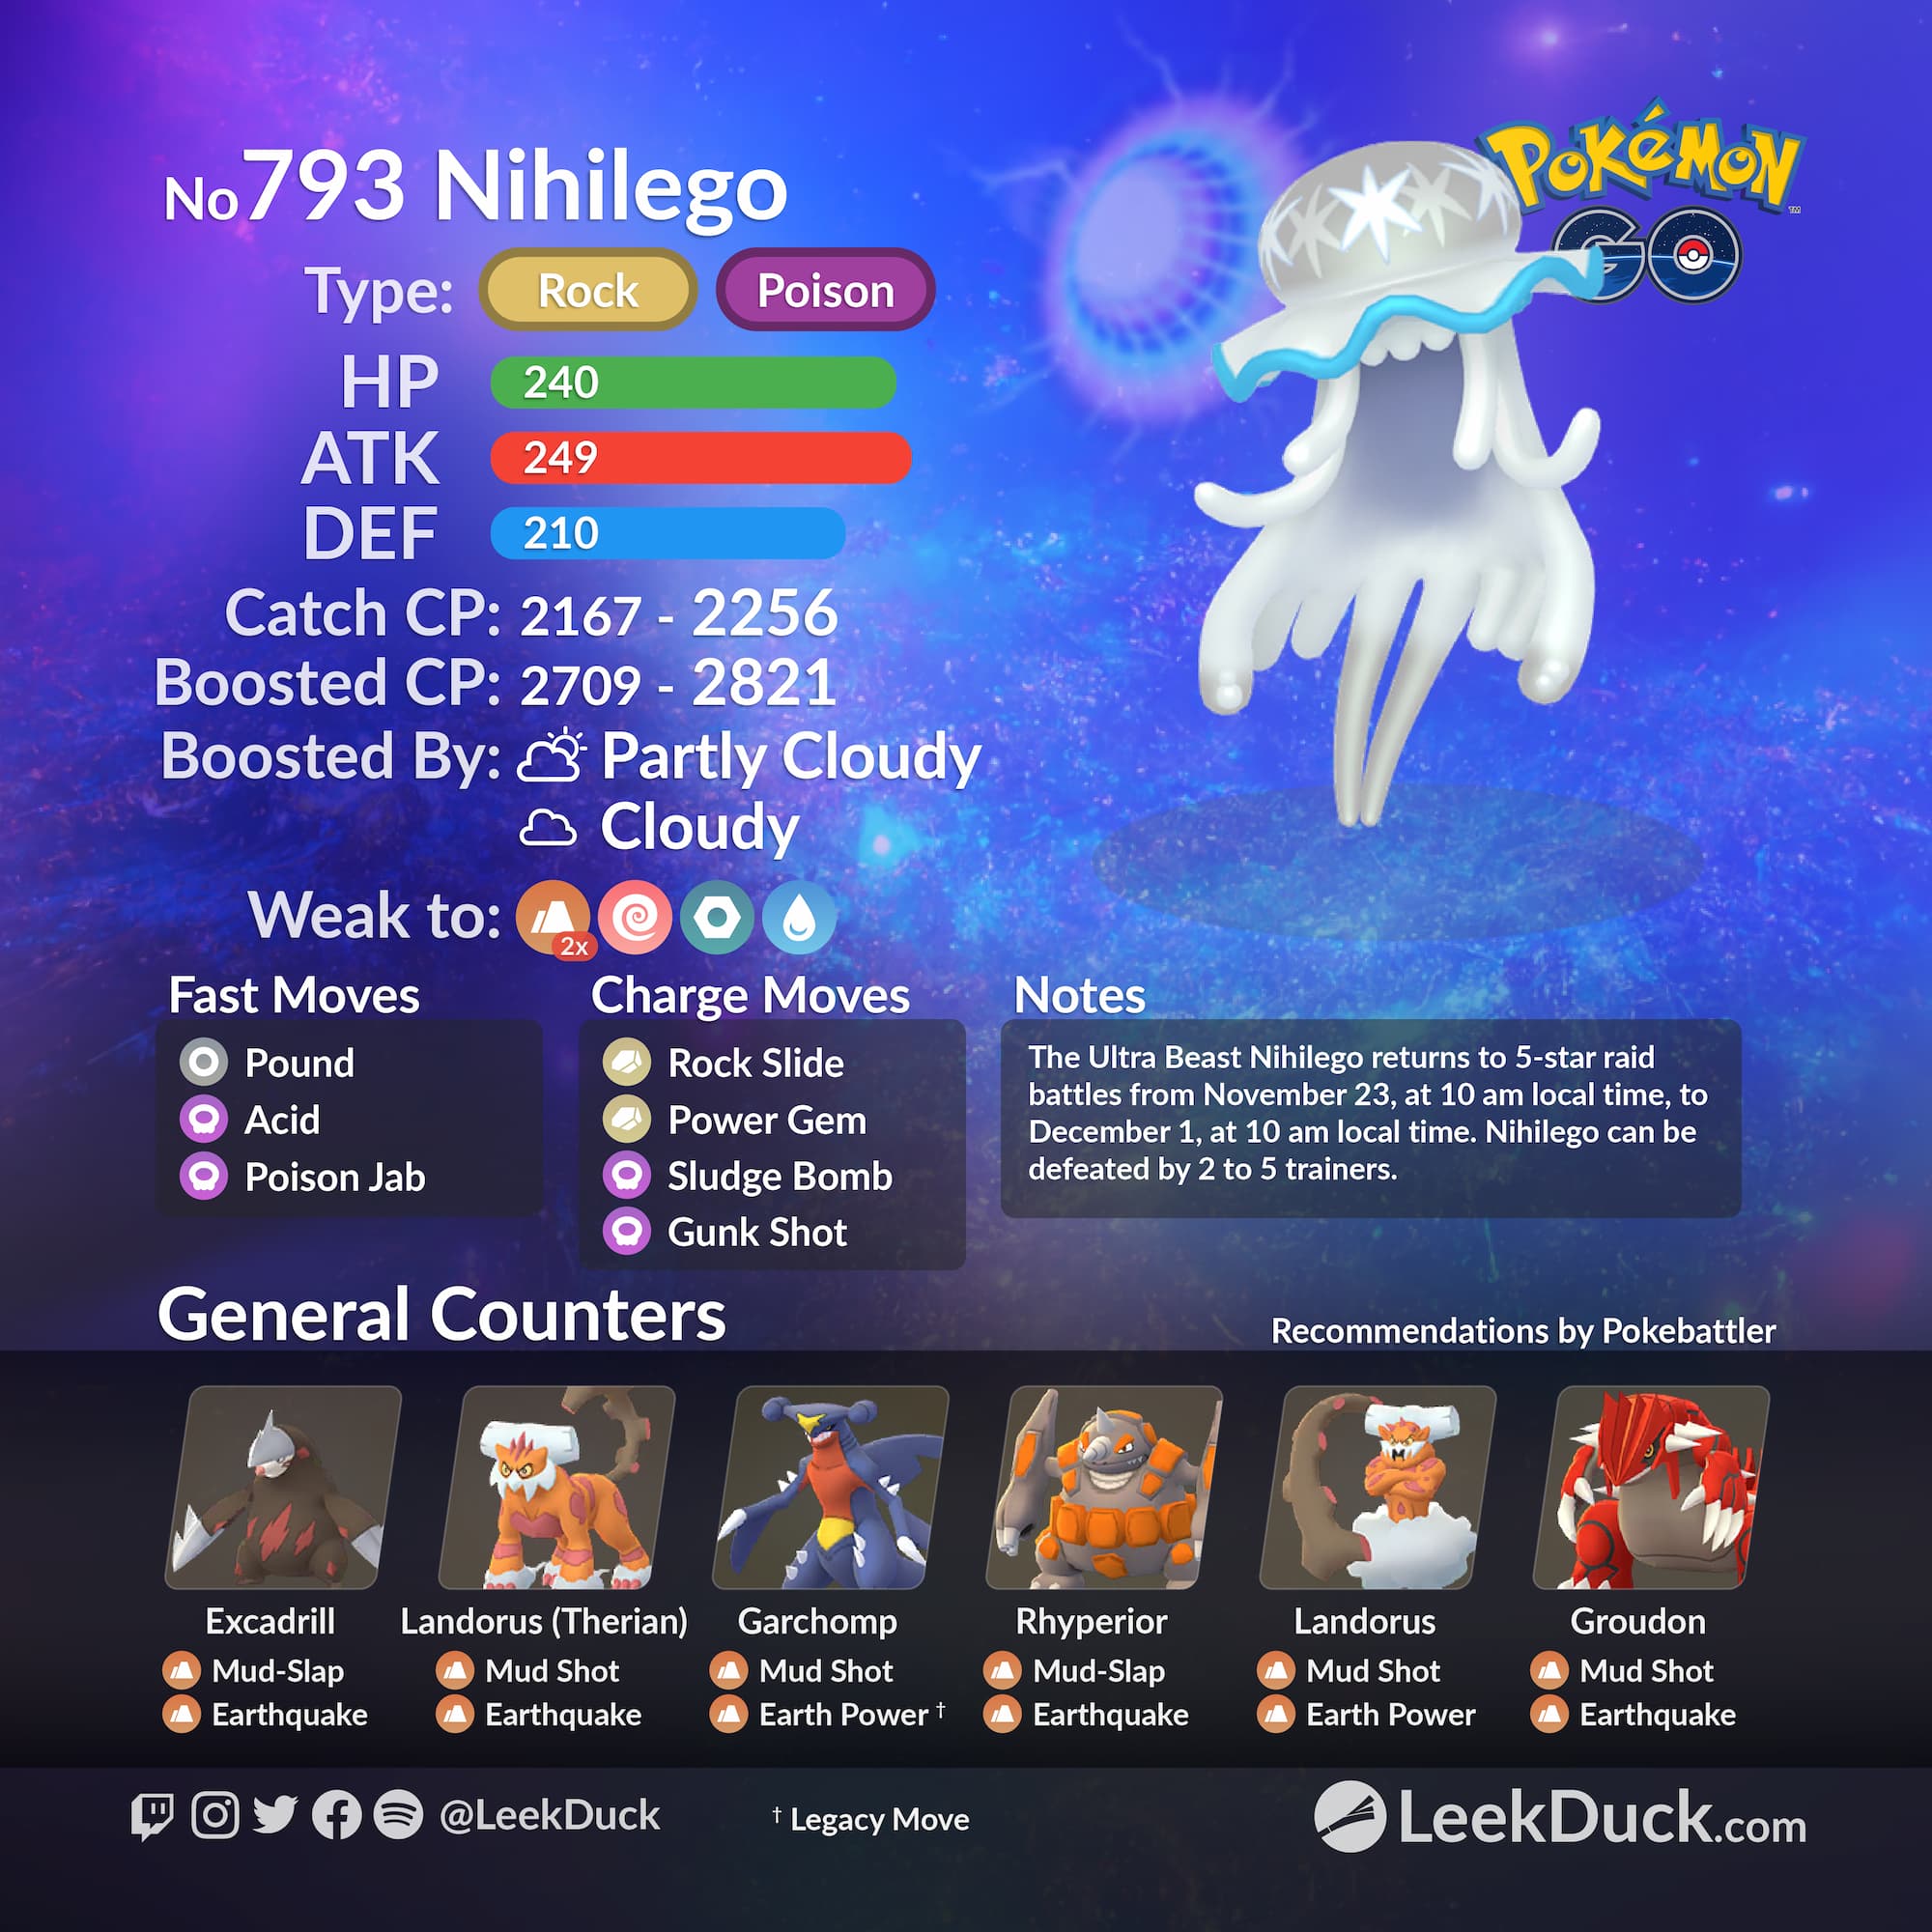 Pokemon Go Announces Solstice Horizons Event Featuring Day and Night  Pokemon and Five-Star Raids Involving the Legendary Nihilego